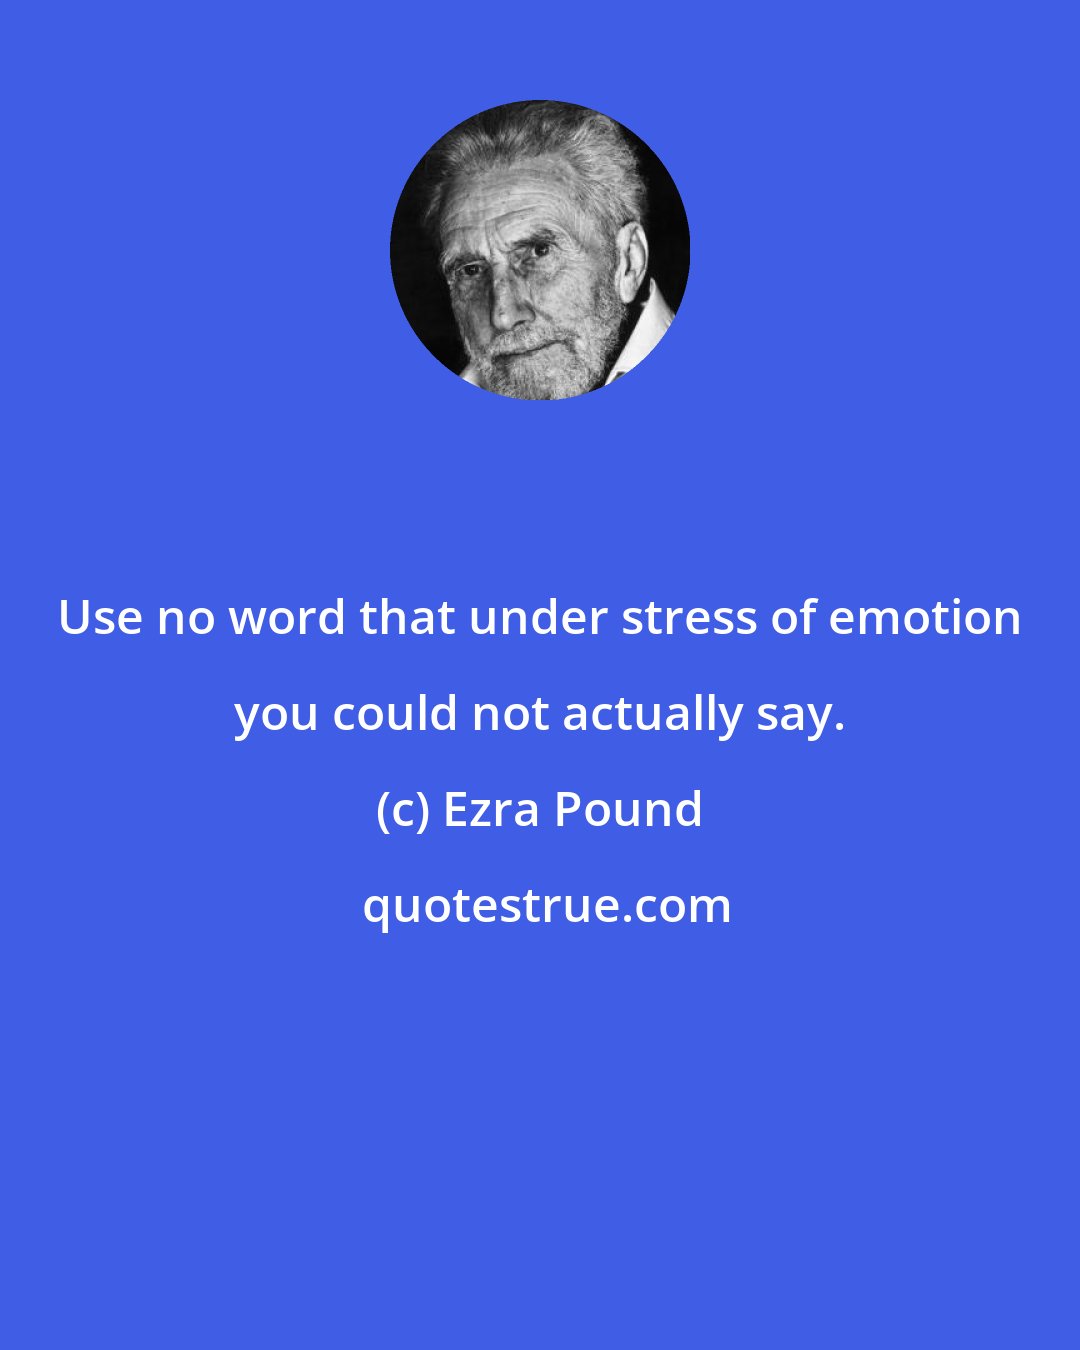 Ezra Pound: Use no word that under stress of emotion you could not actually say.